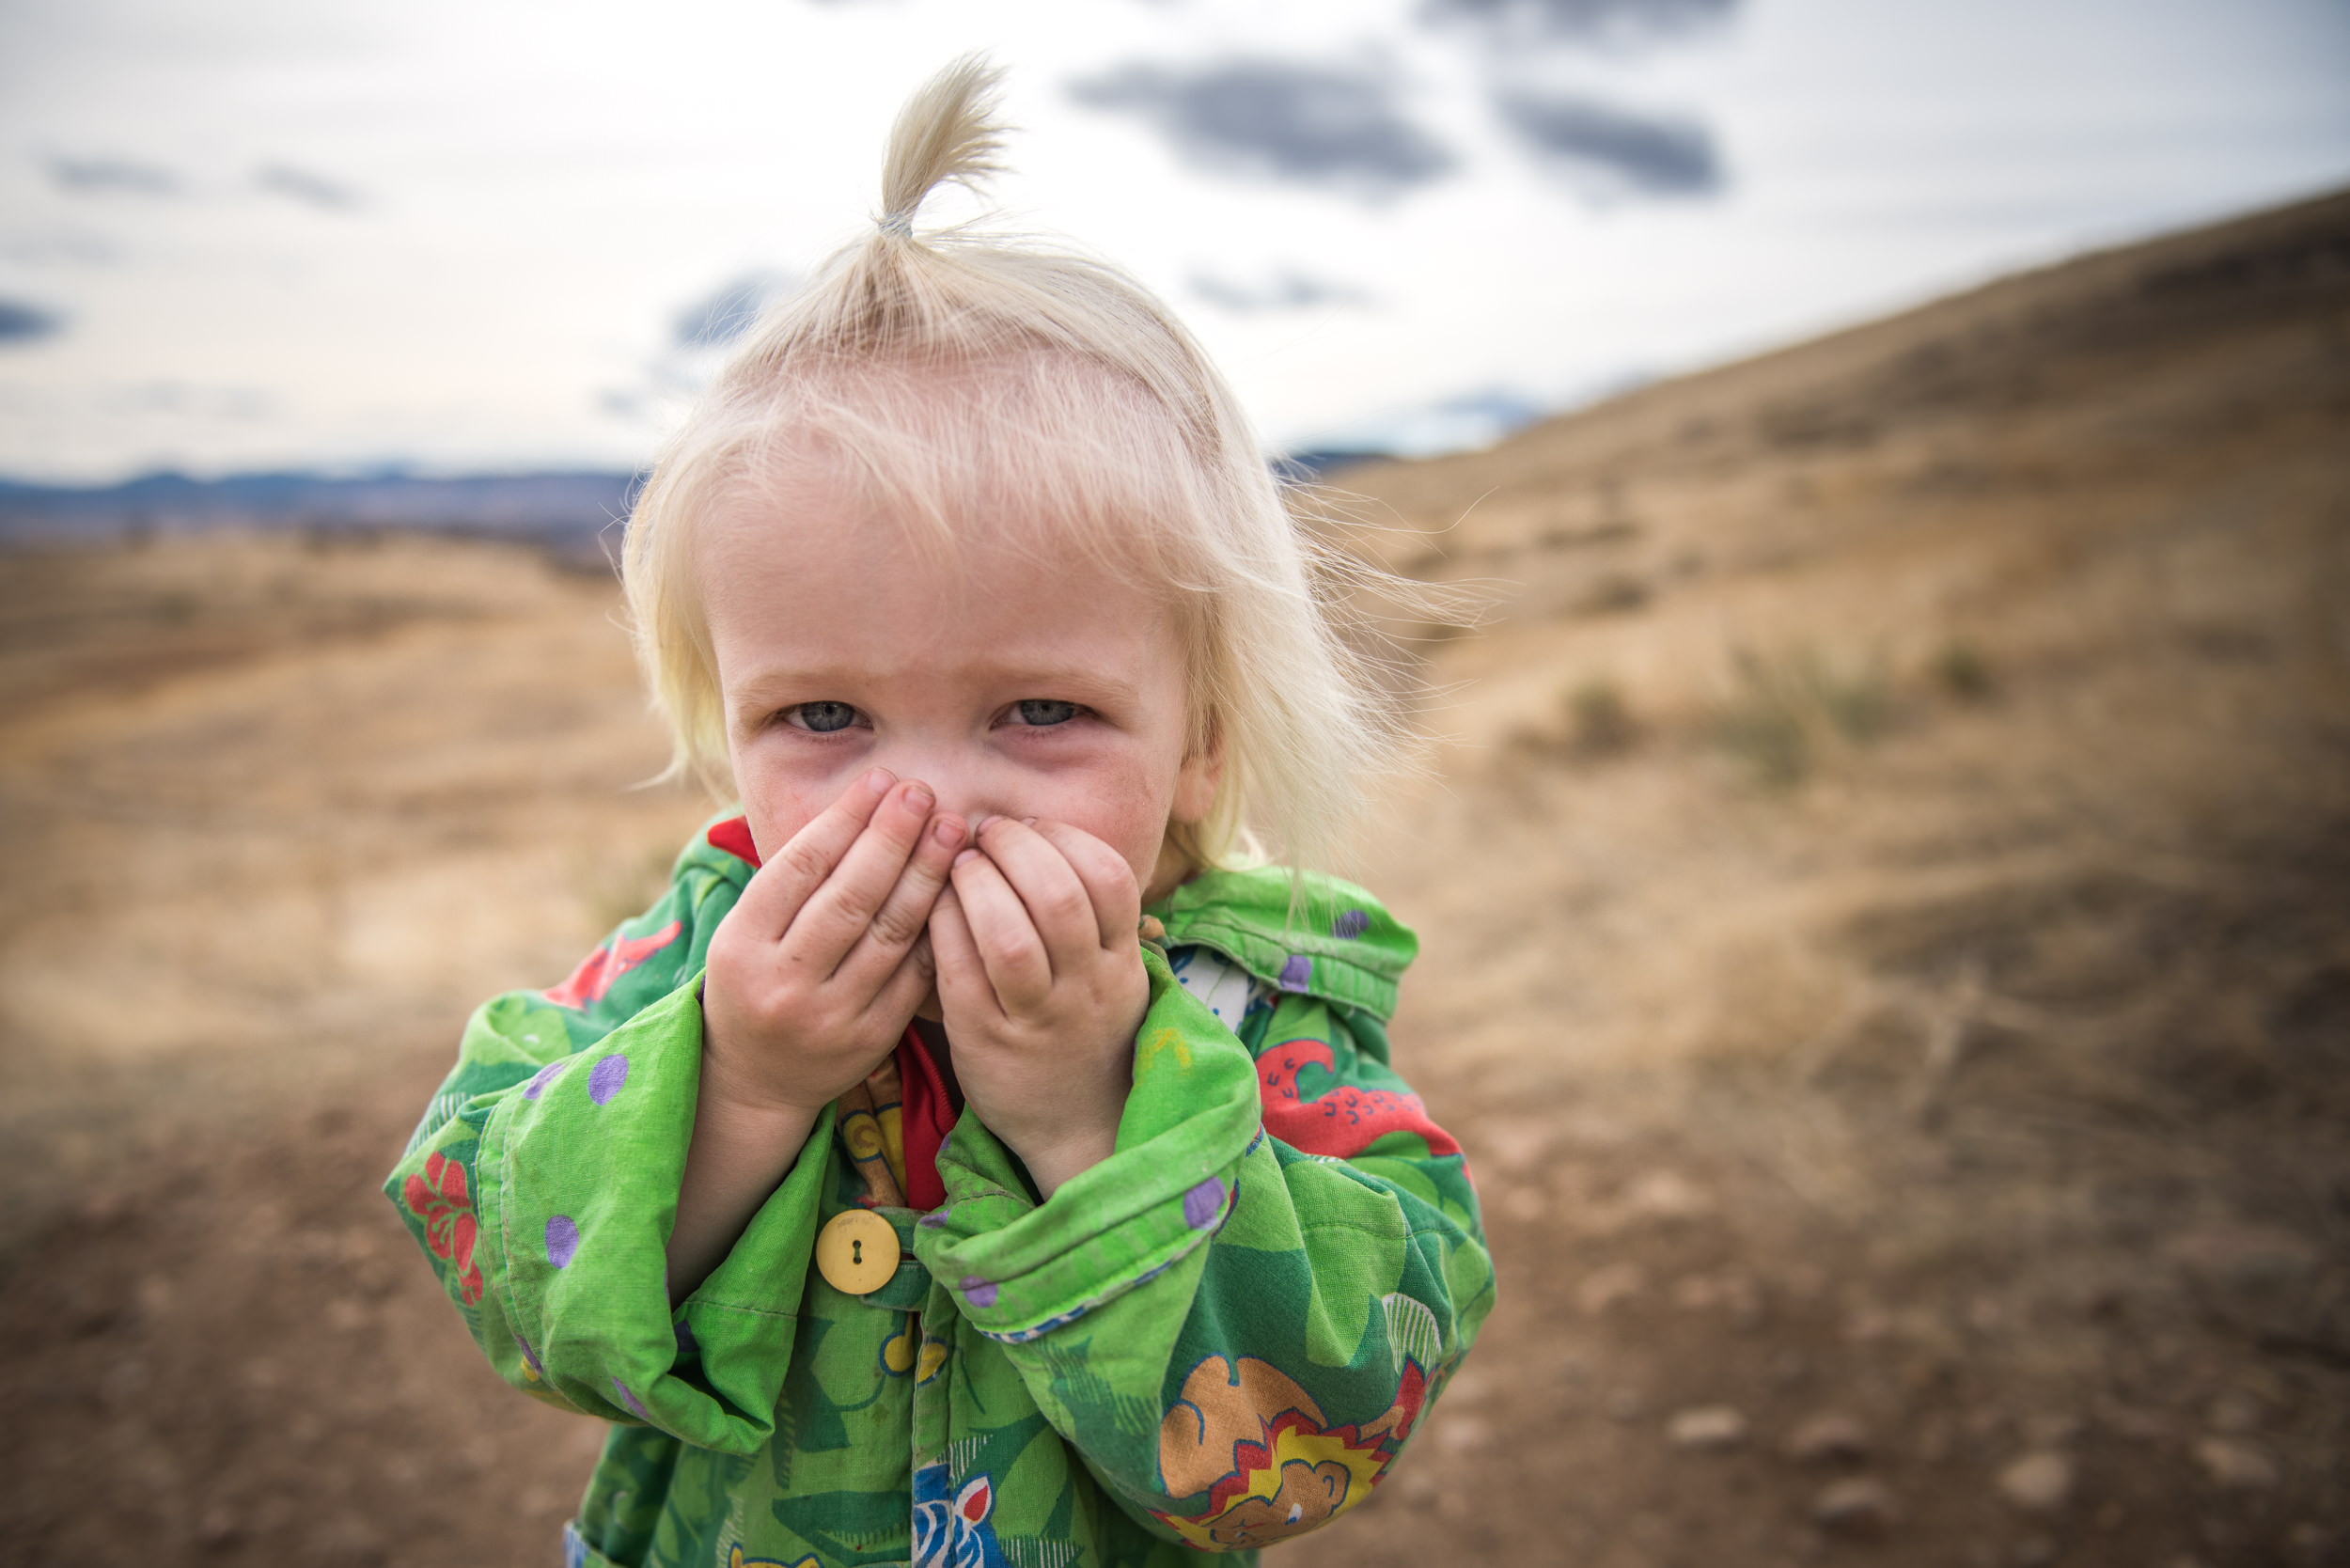 Blog - Molly Rees Photo - Documentary Childhood Photography - boy on green mountain hiking trail in denver colorado by M. Menschel